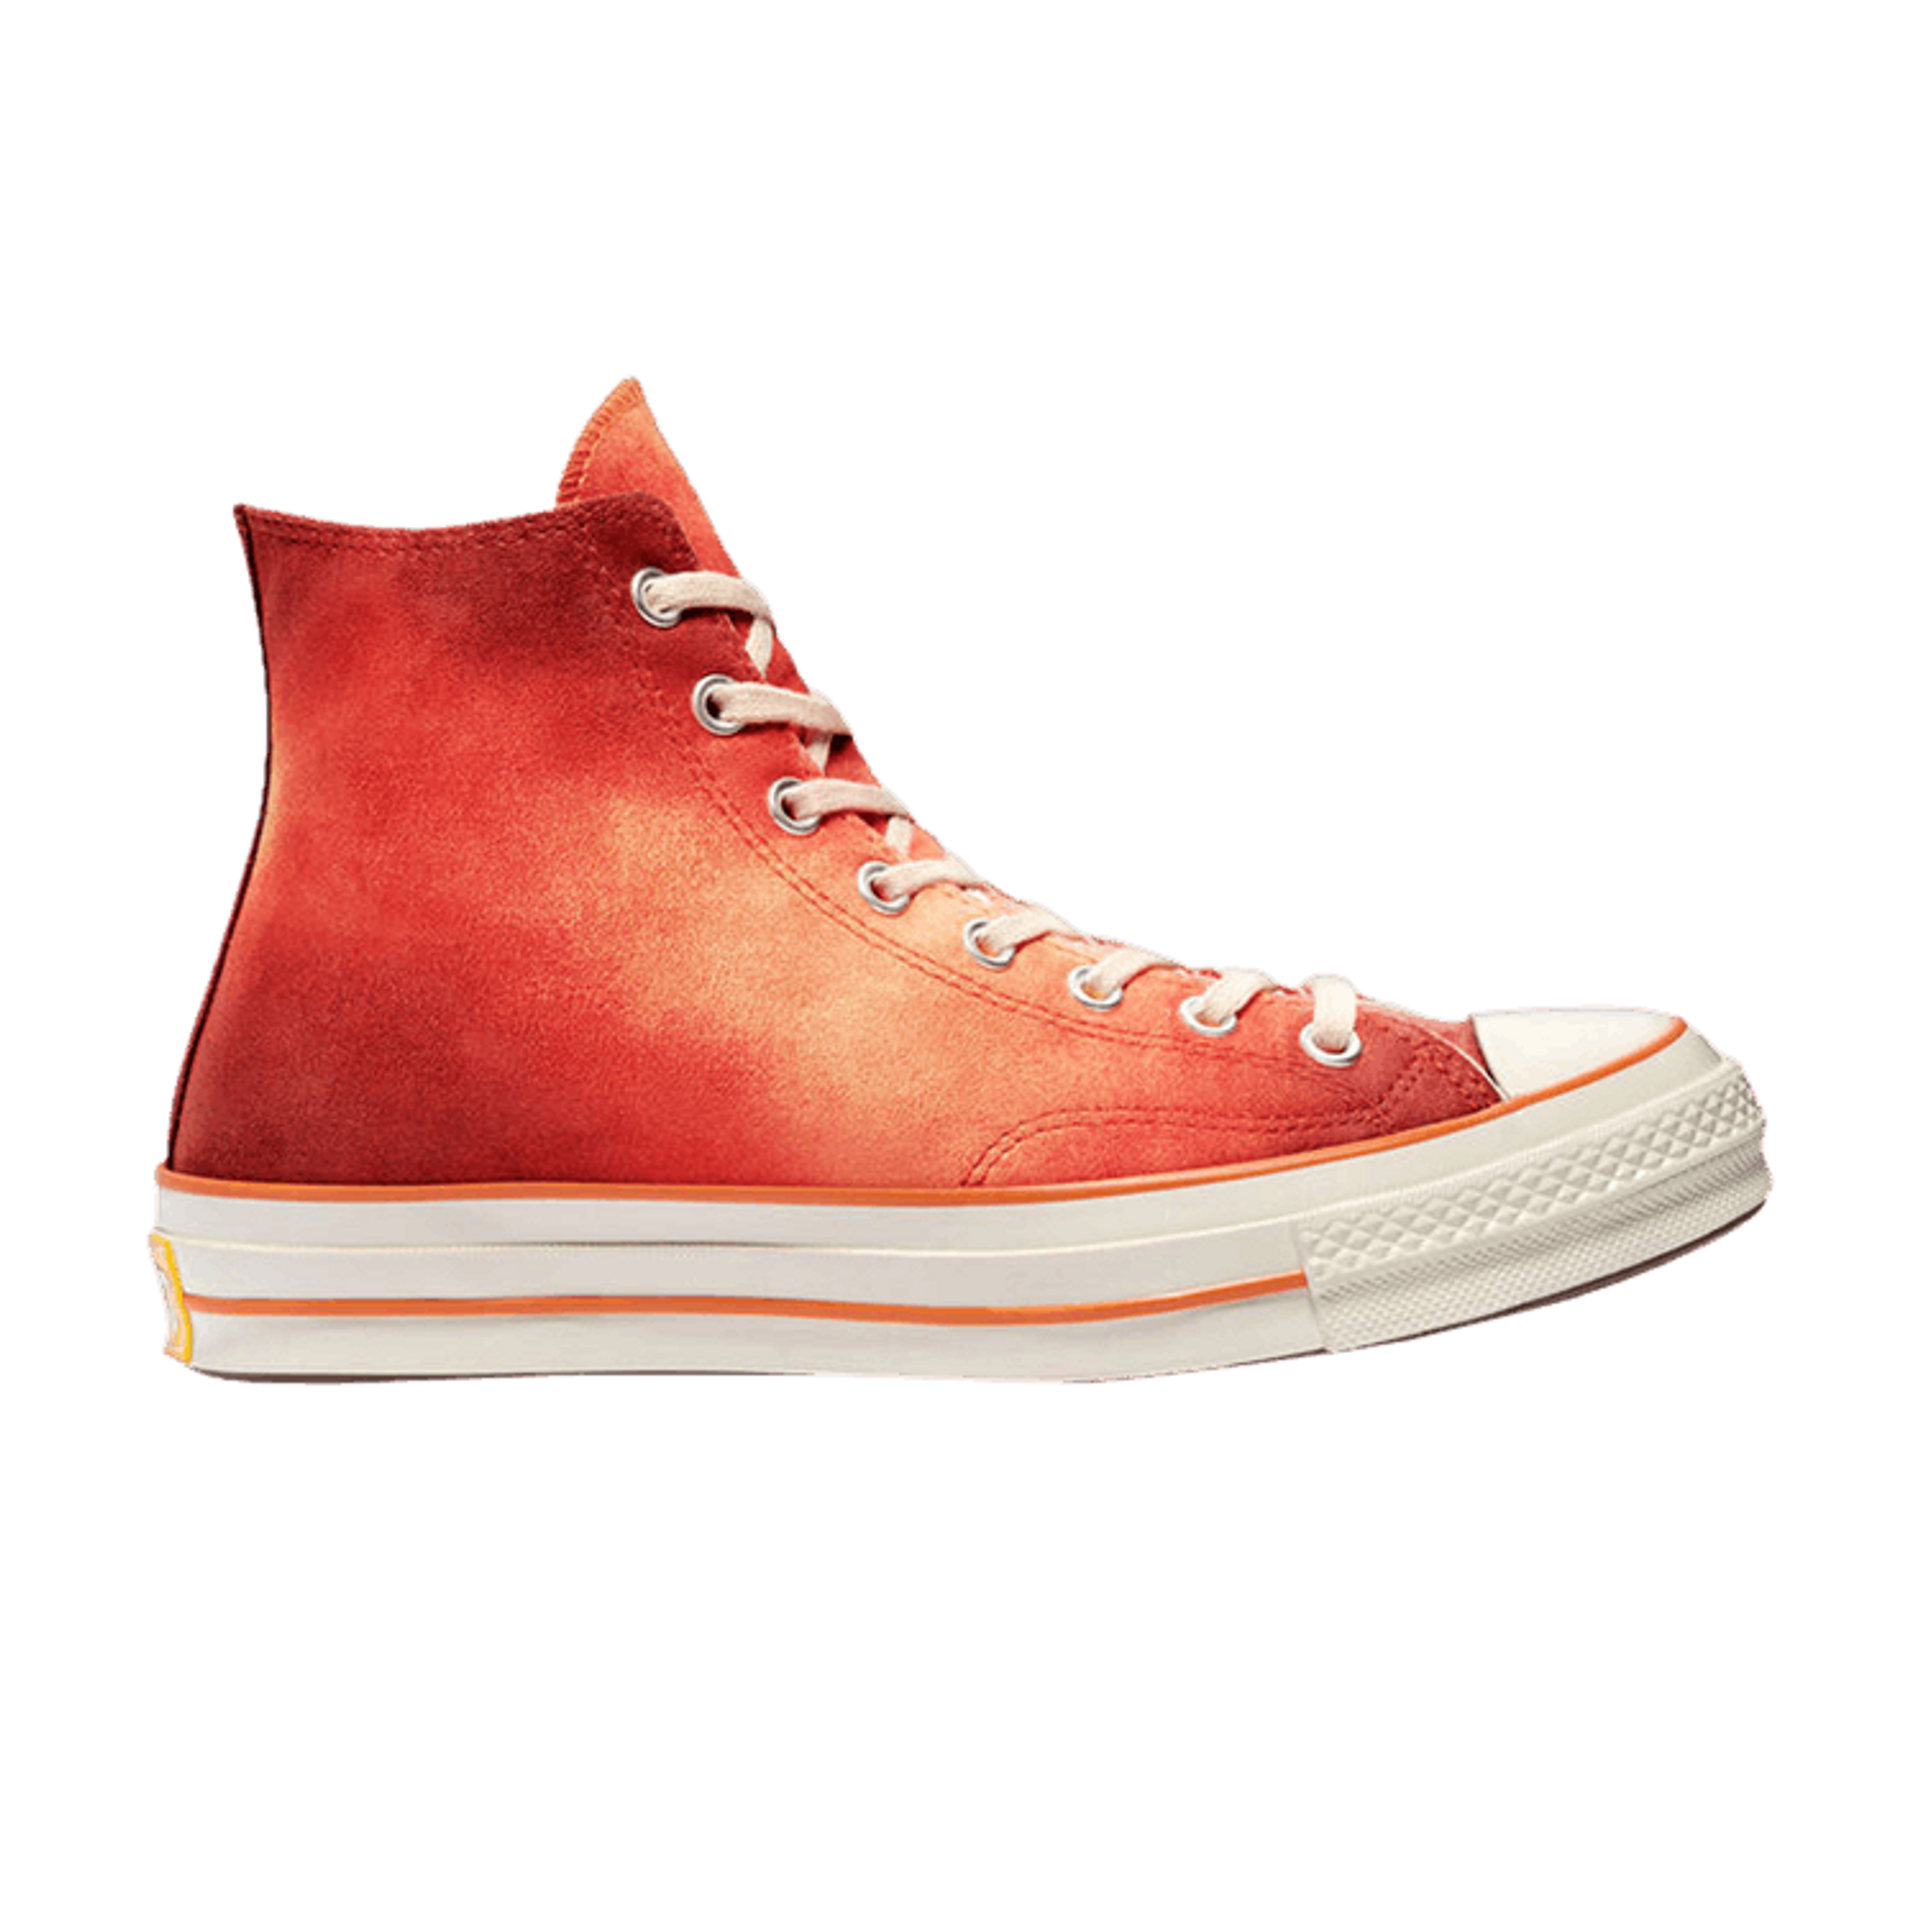 Concepts x Converse Chuck 70 High 'Southern Flame'